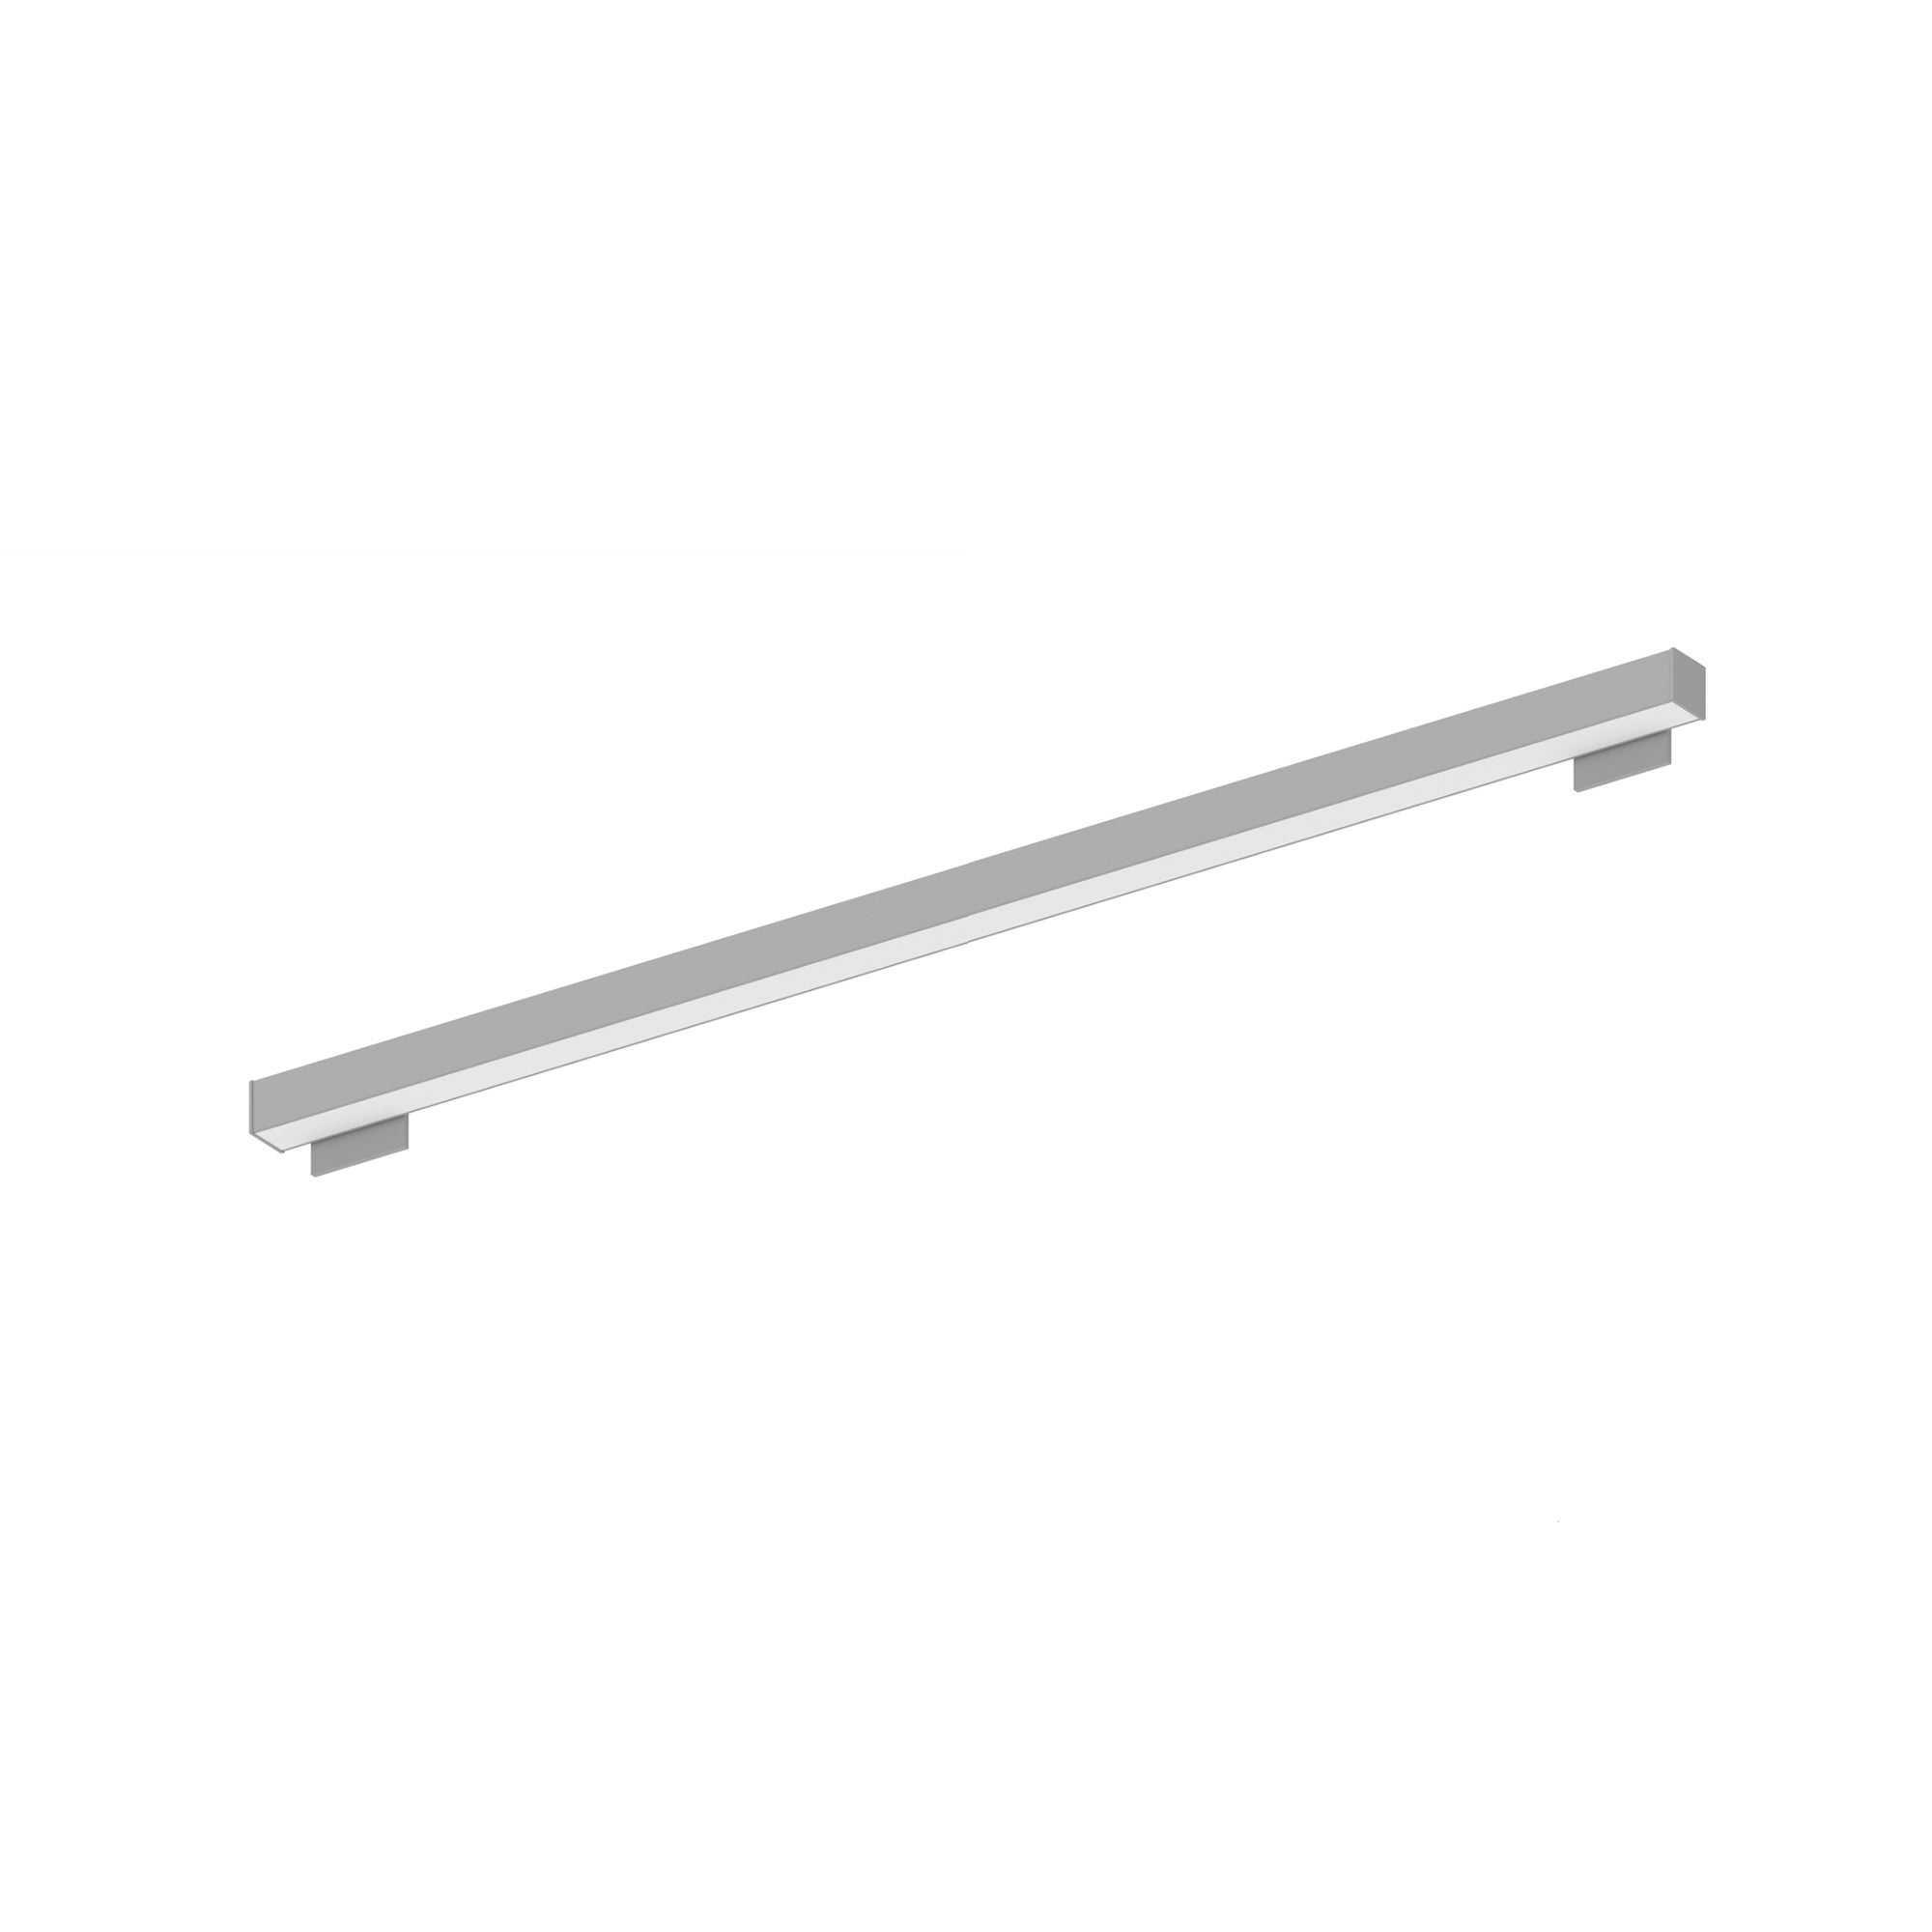 Nora Lighting NWLIN-81040A/L4-R4 - Linear - 8' L-Line LED Wall Mount Linear, 8400lm / 4000K, 4 Inchx4 Inch Left Plate & 4 Inchx4 Inch Right Plate, Aluminum Finish